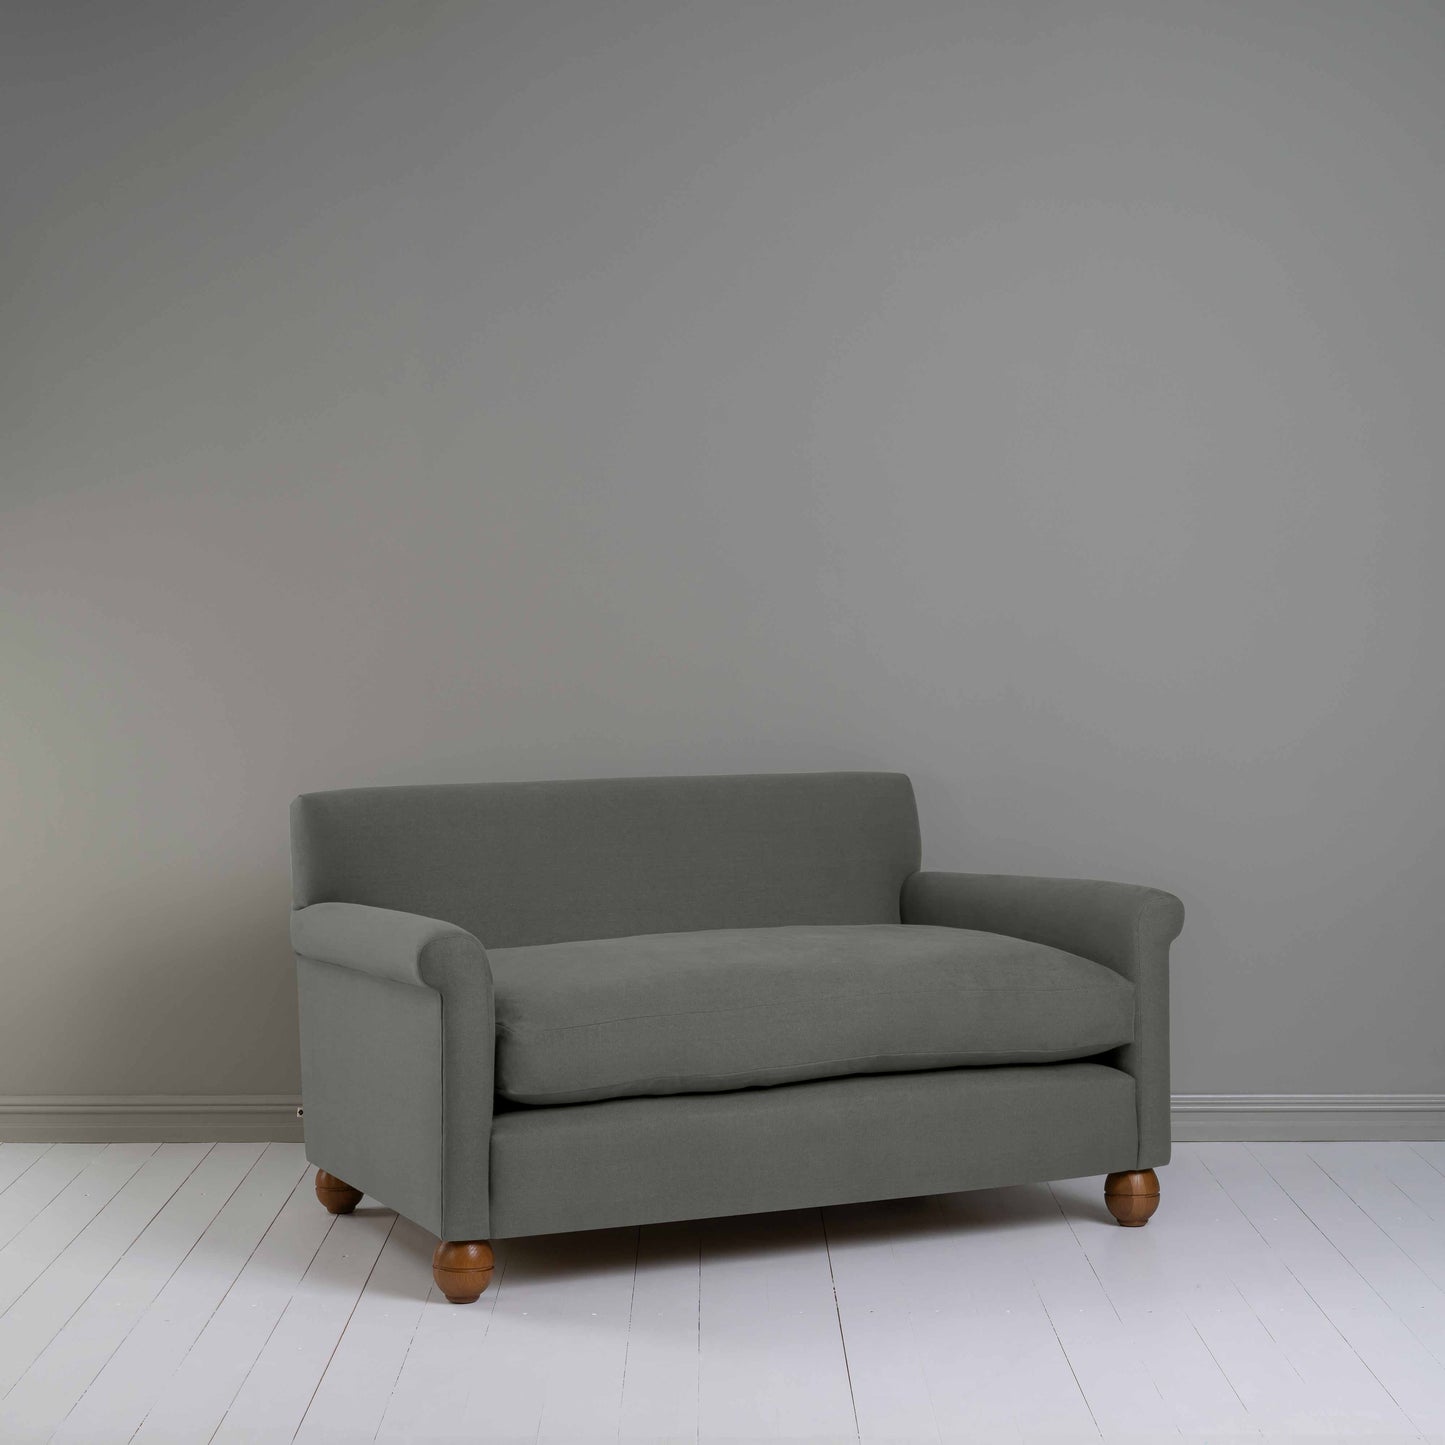 Idler 2 Seater Sofa in Laidback Linen Shadow